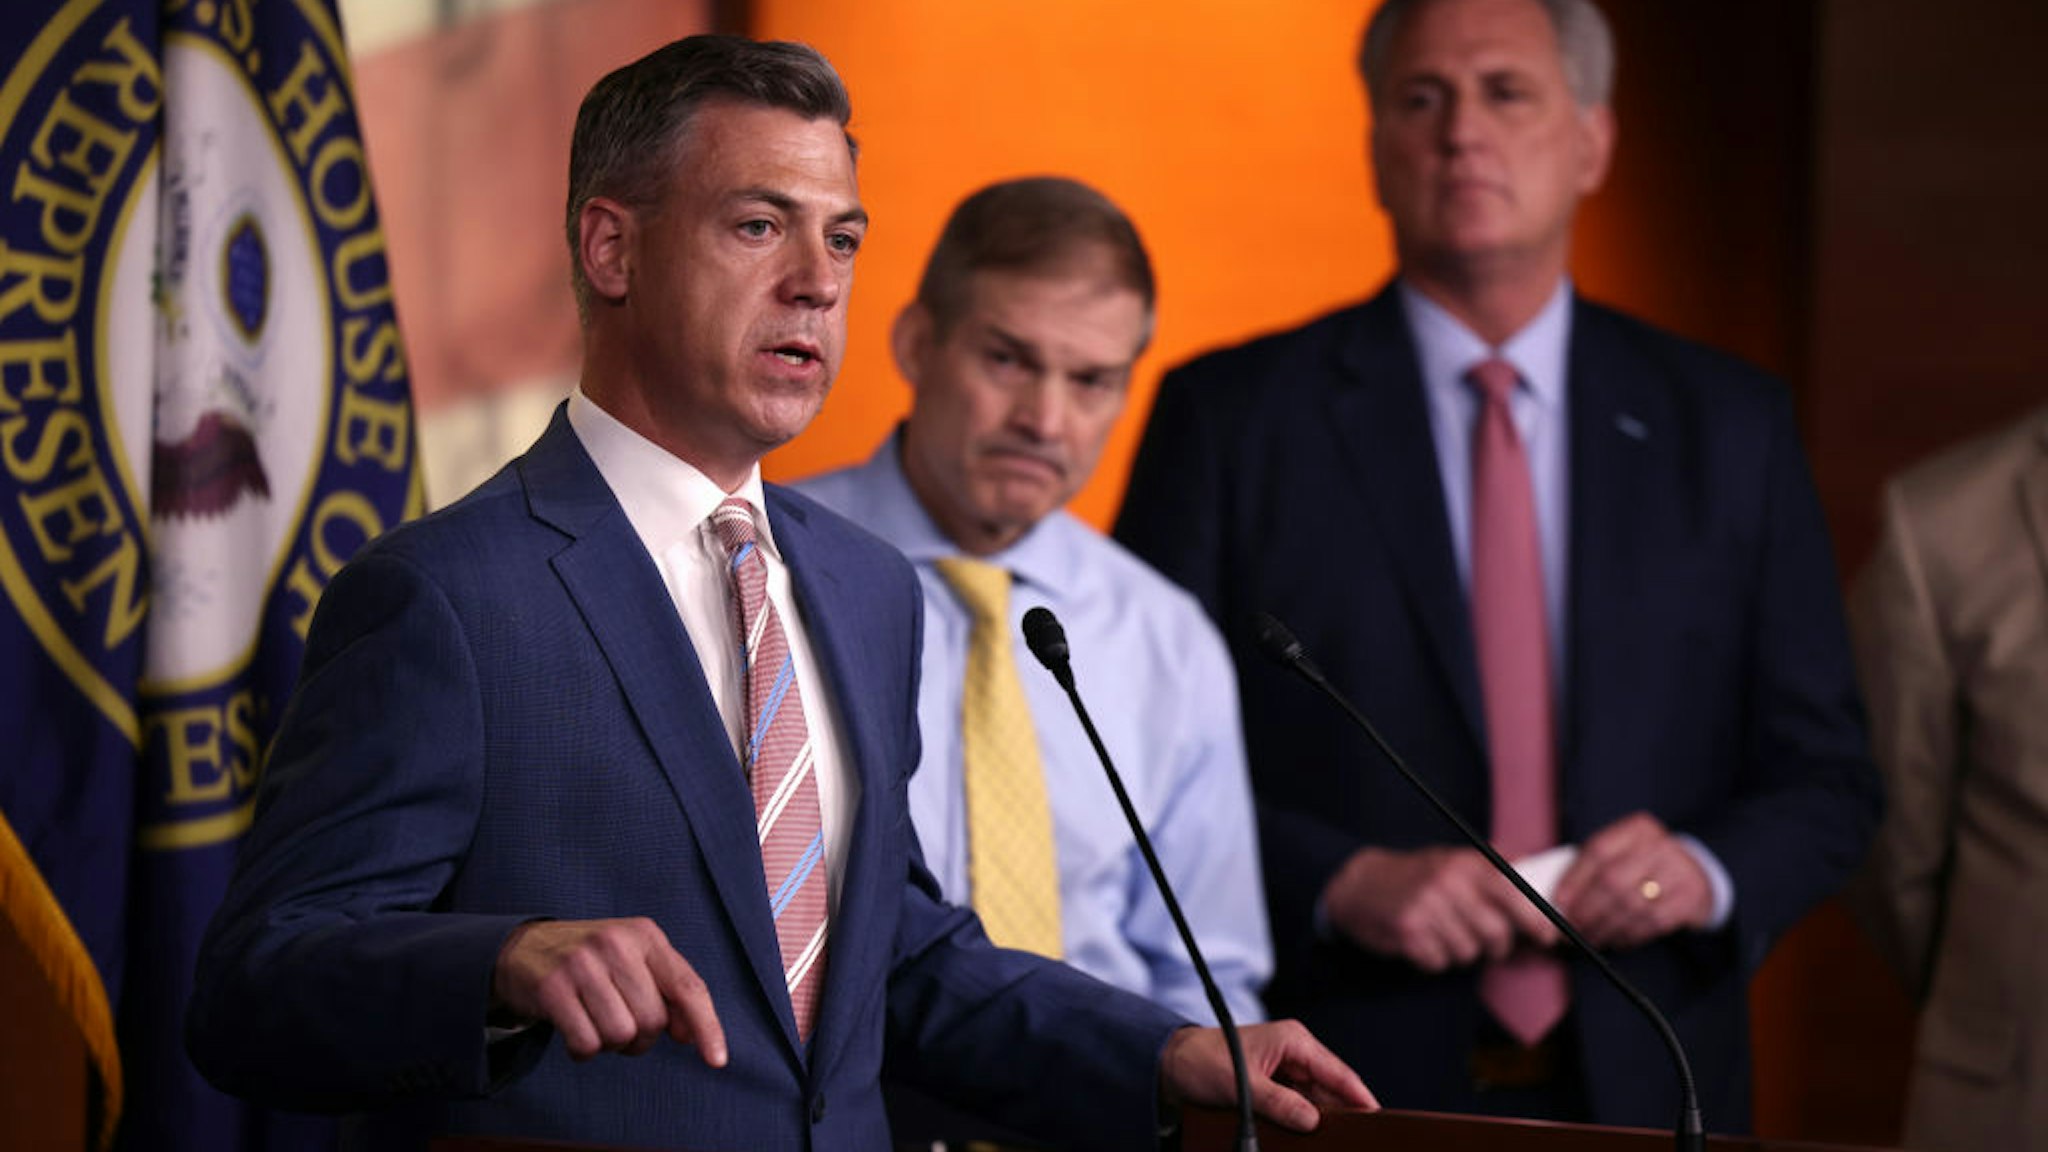 WASHINGTON, DC - JULY 21: Rep. Jim Banks (R-IN) (L), joined by Rep. Jim Jordan (R-ON) (C) and House Minority Leader Kevin McCarthy (R-CA) speaks at a news conference on House Speaker Nancy Pelosi’s decision to reject two of Leader McCarthy’s selected members from serving on the committee investigating the January 6th riots on July 21, 2021 in Washington, DC. Speaker Pelosi announced she would be rejecting Rep. Banks and Rep. Jordan’s assignment to the committee. (Photo by Kevin Dietsch/Getty Images)